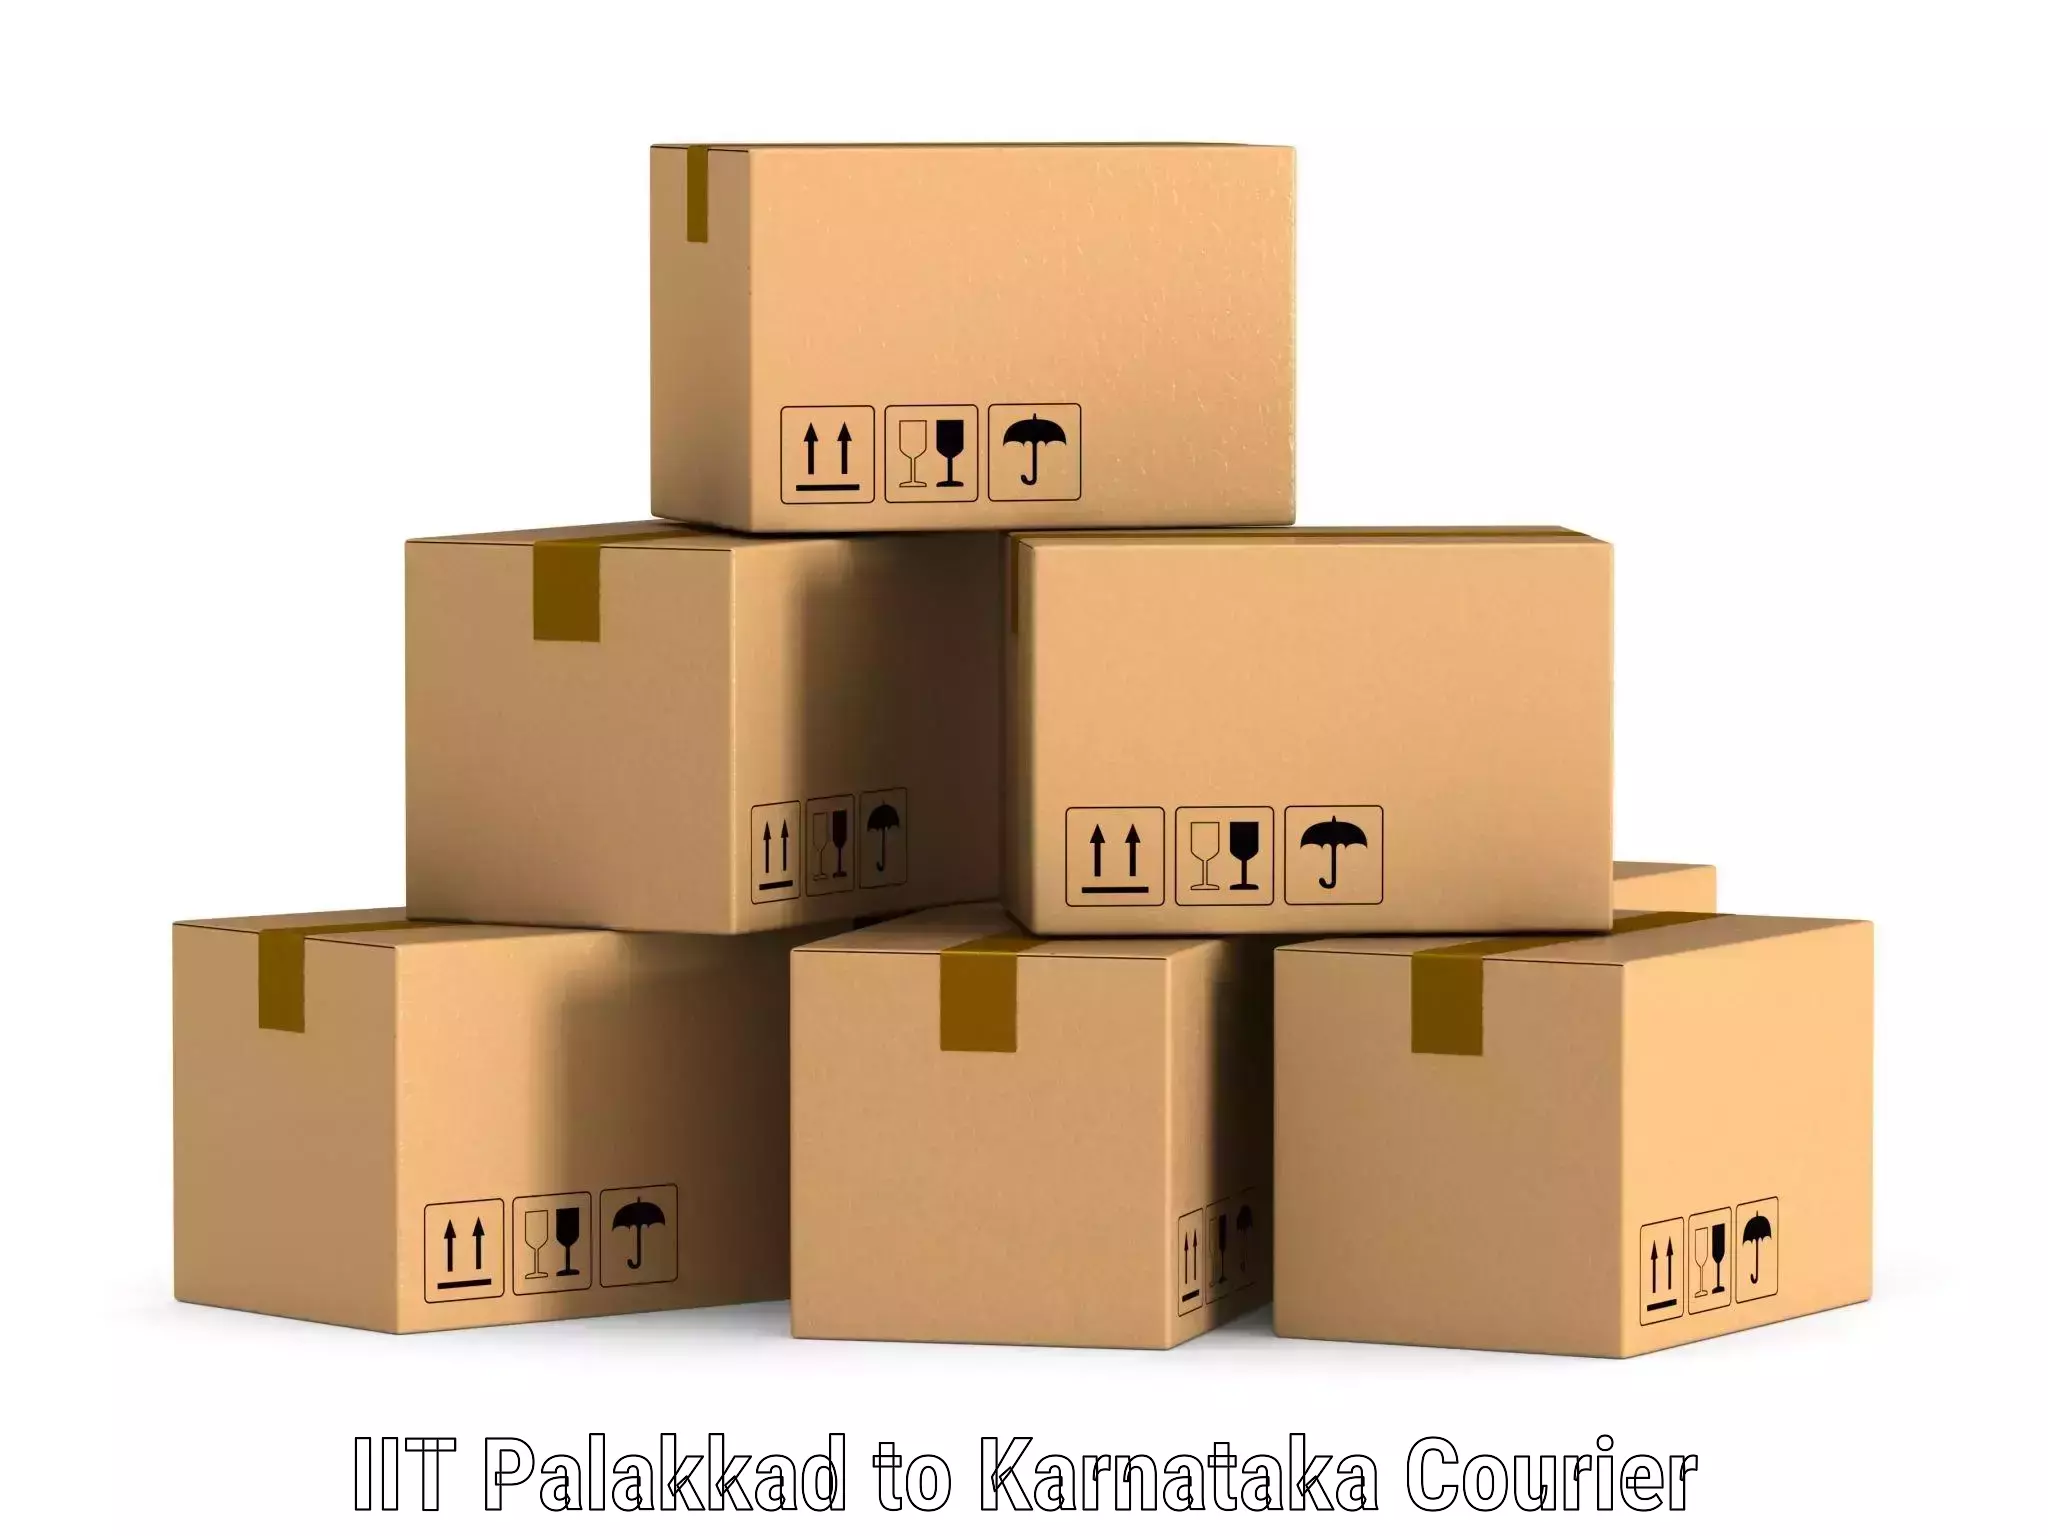 Next-day delivery options in IIT Palakkad to Bidar